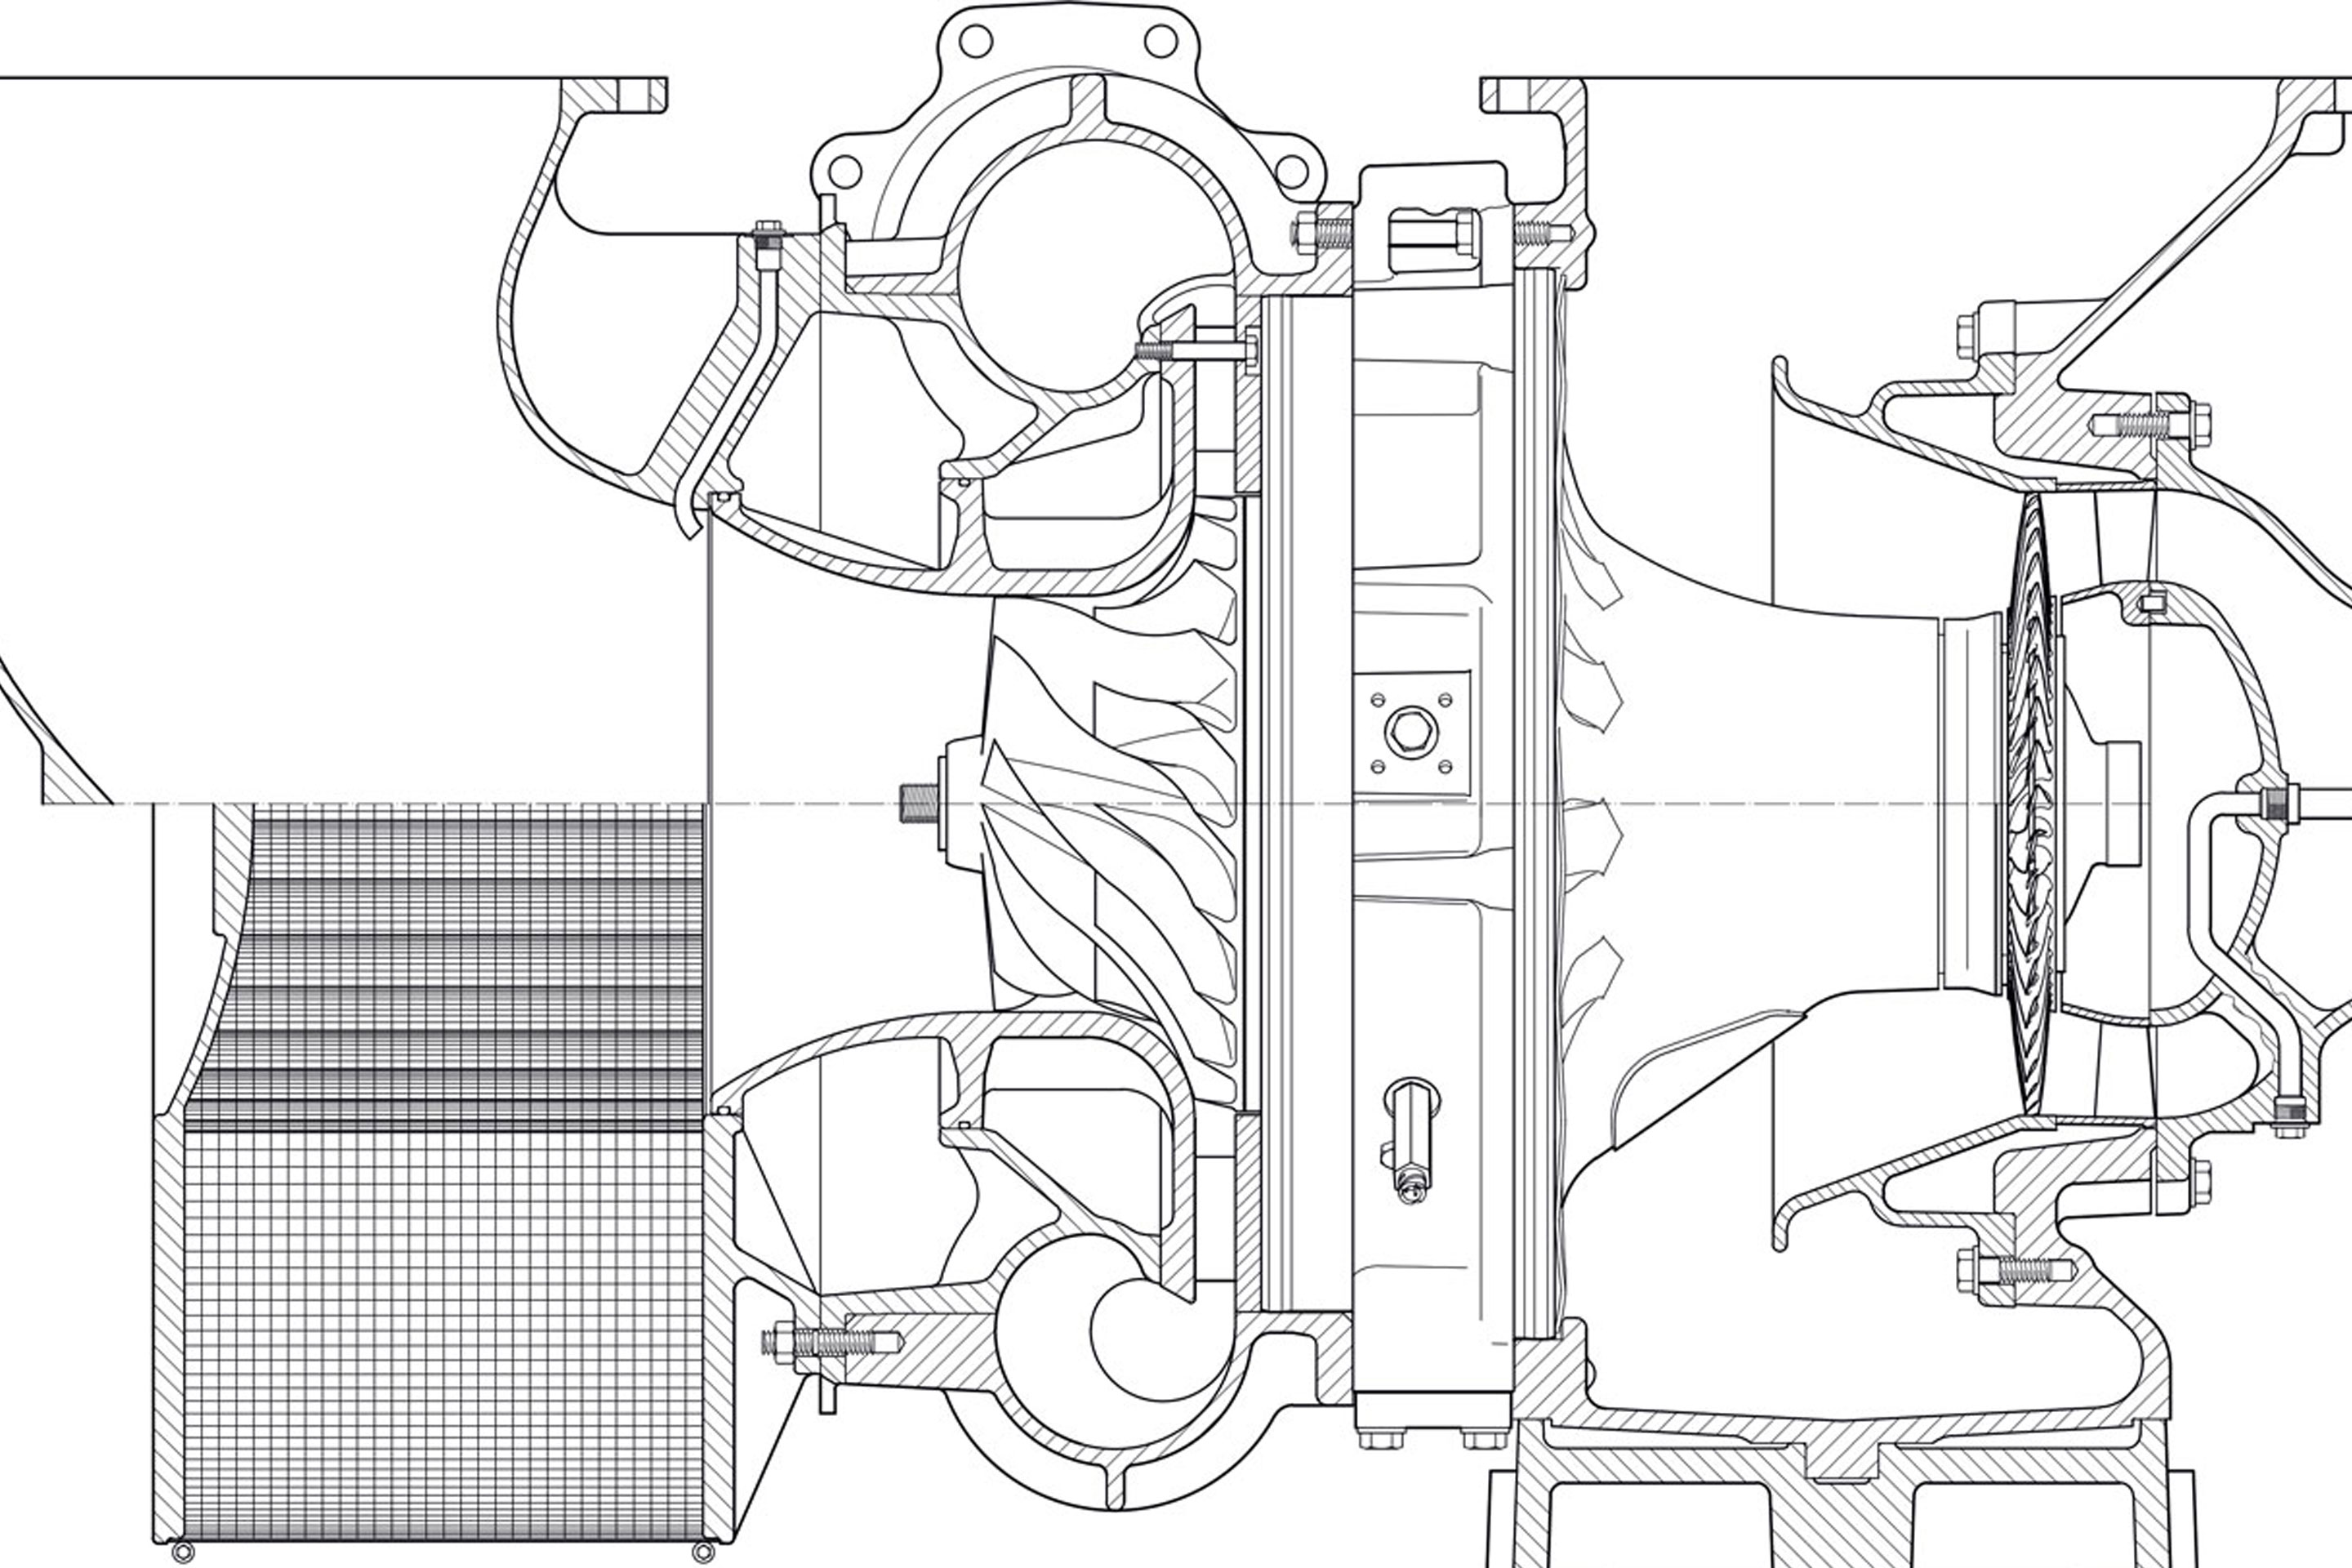 A technical drawing of the ABB TPL69-A10 turbocharger and turbine hood